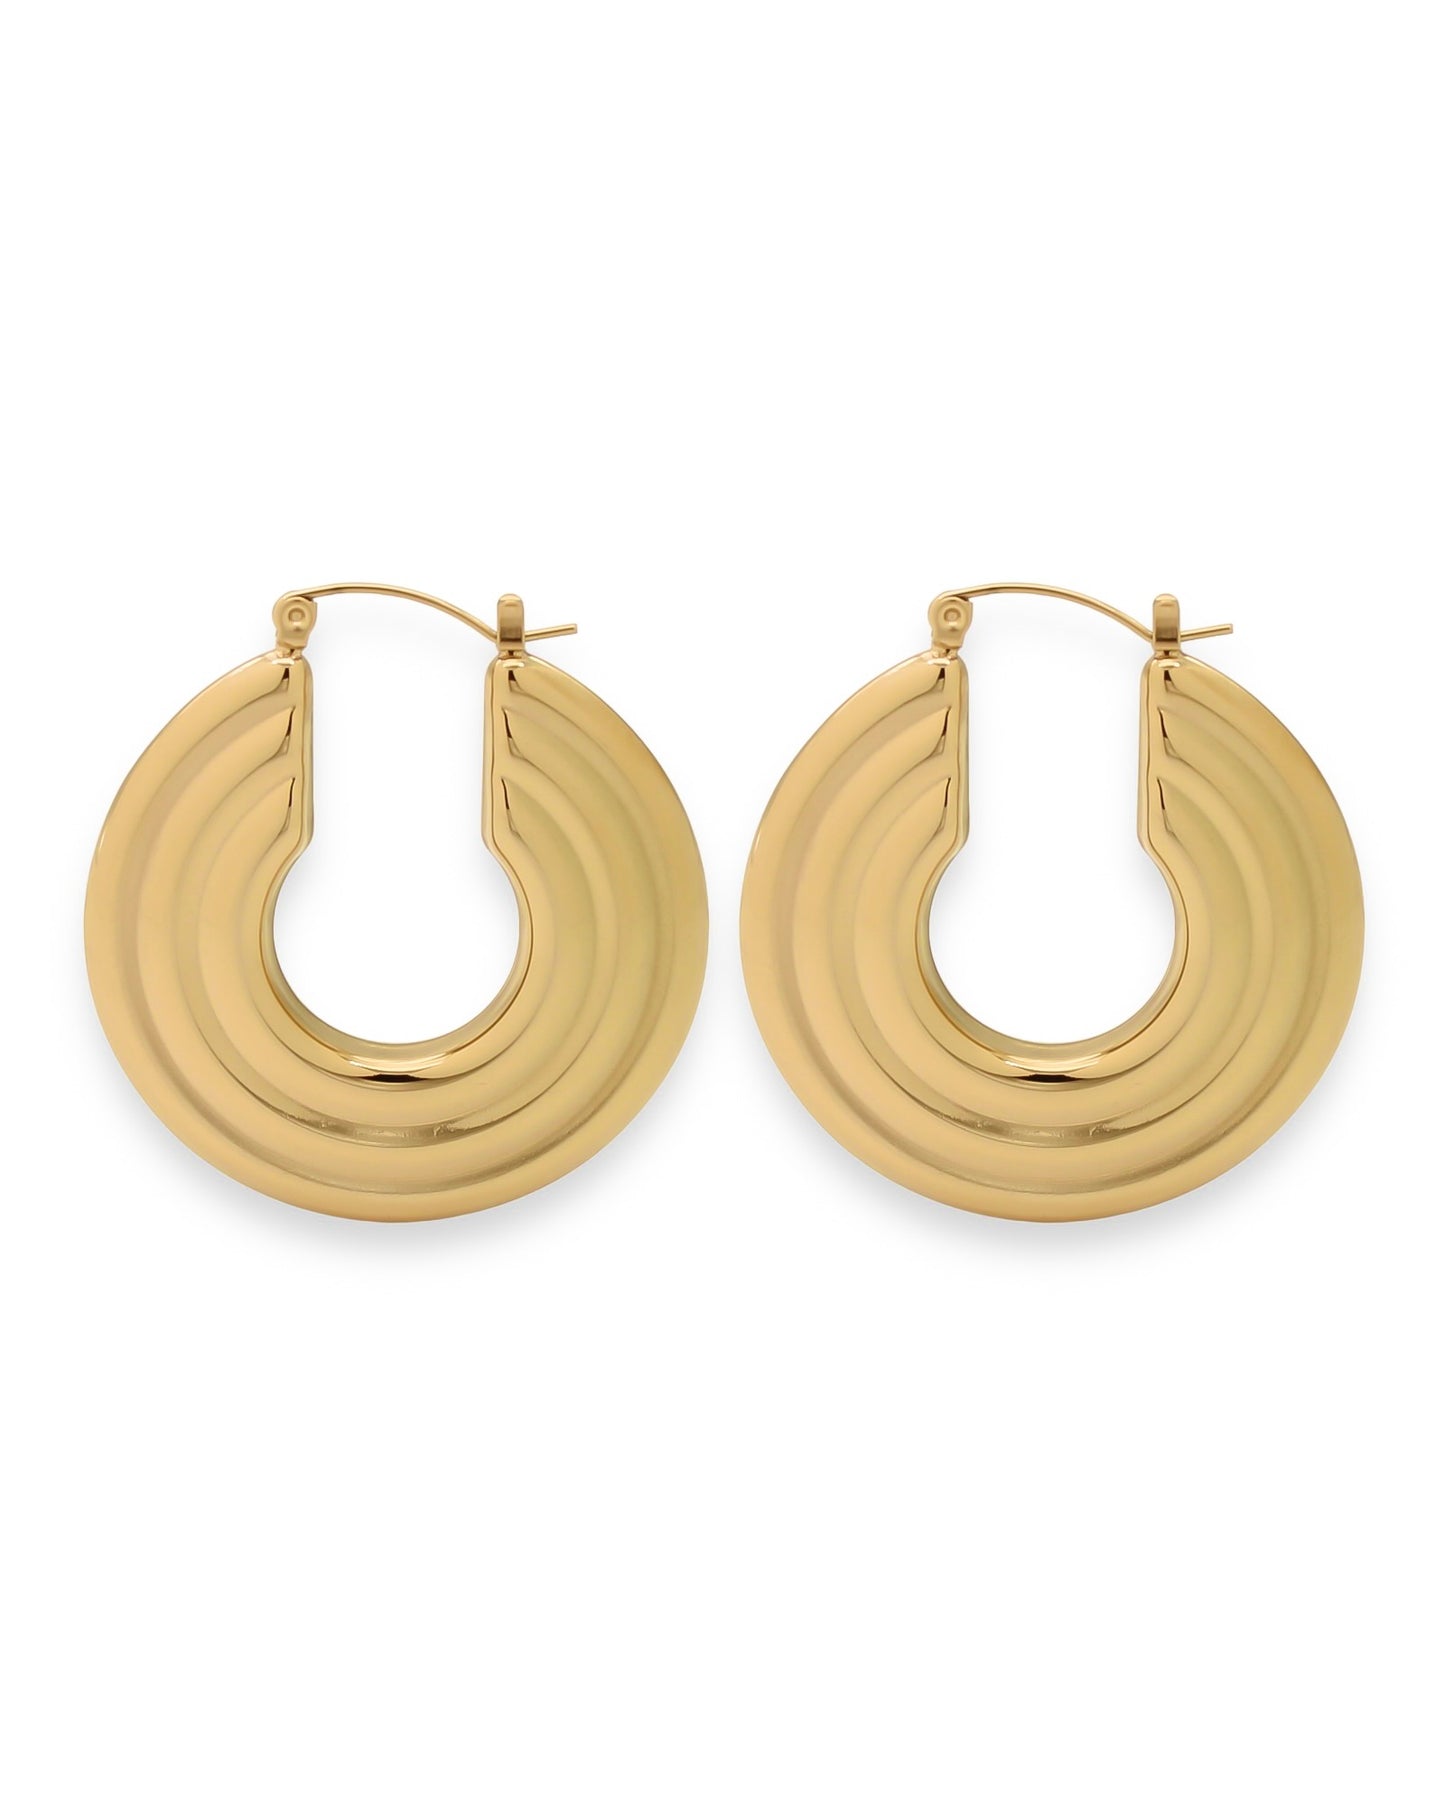 ROUNDED Hoops